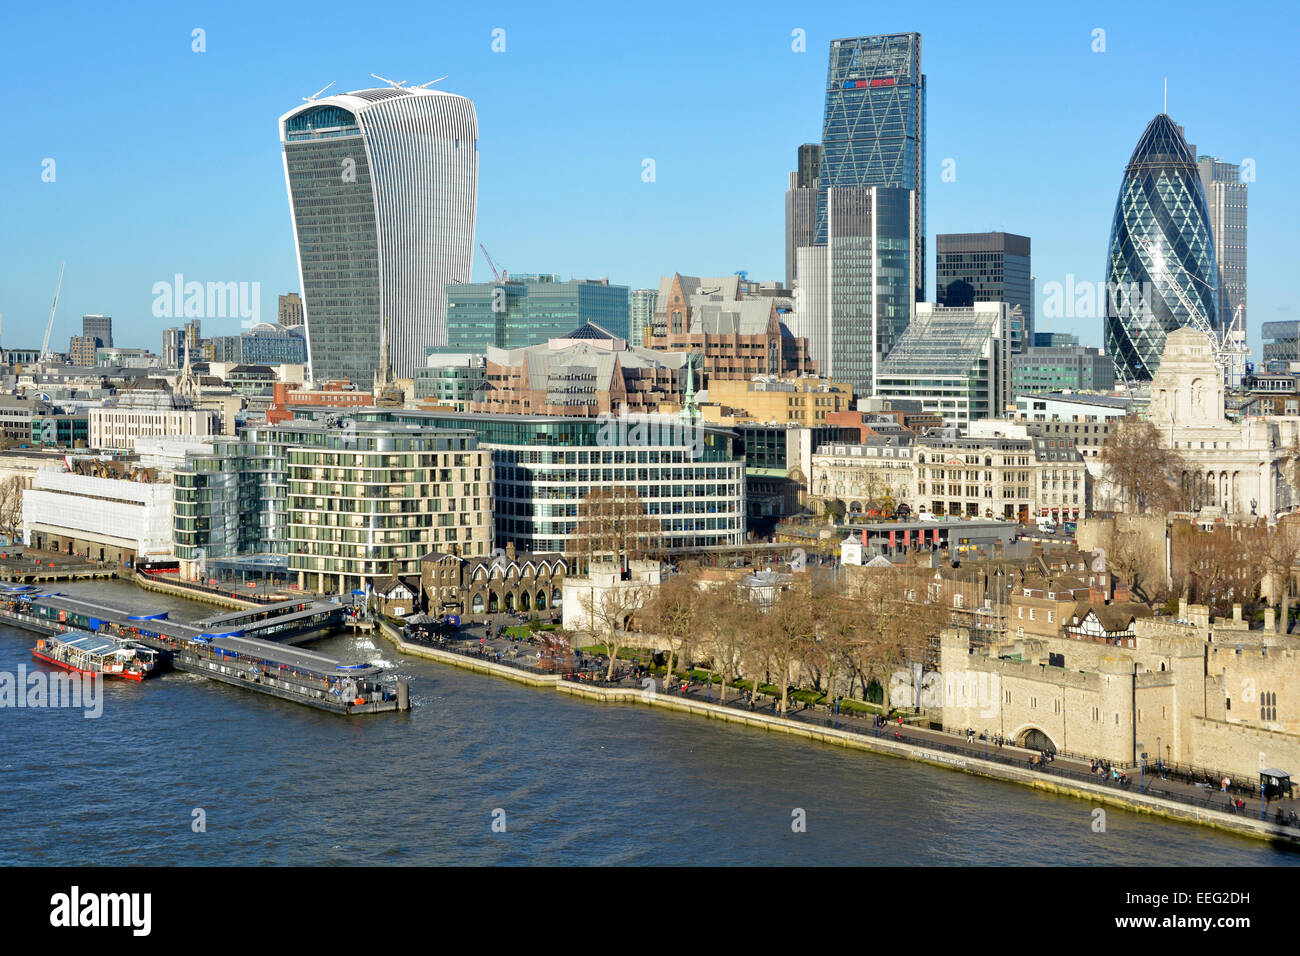 Tower Pier & River Thames with City of London skyline "Walkie Talkie",  "Cheese Grater", & "Gherkin" skyscrapers & landmarks England UK Stock Photo  - Alamy